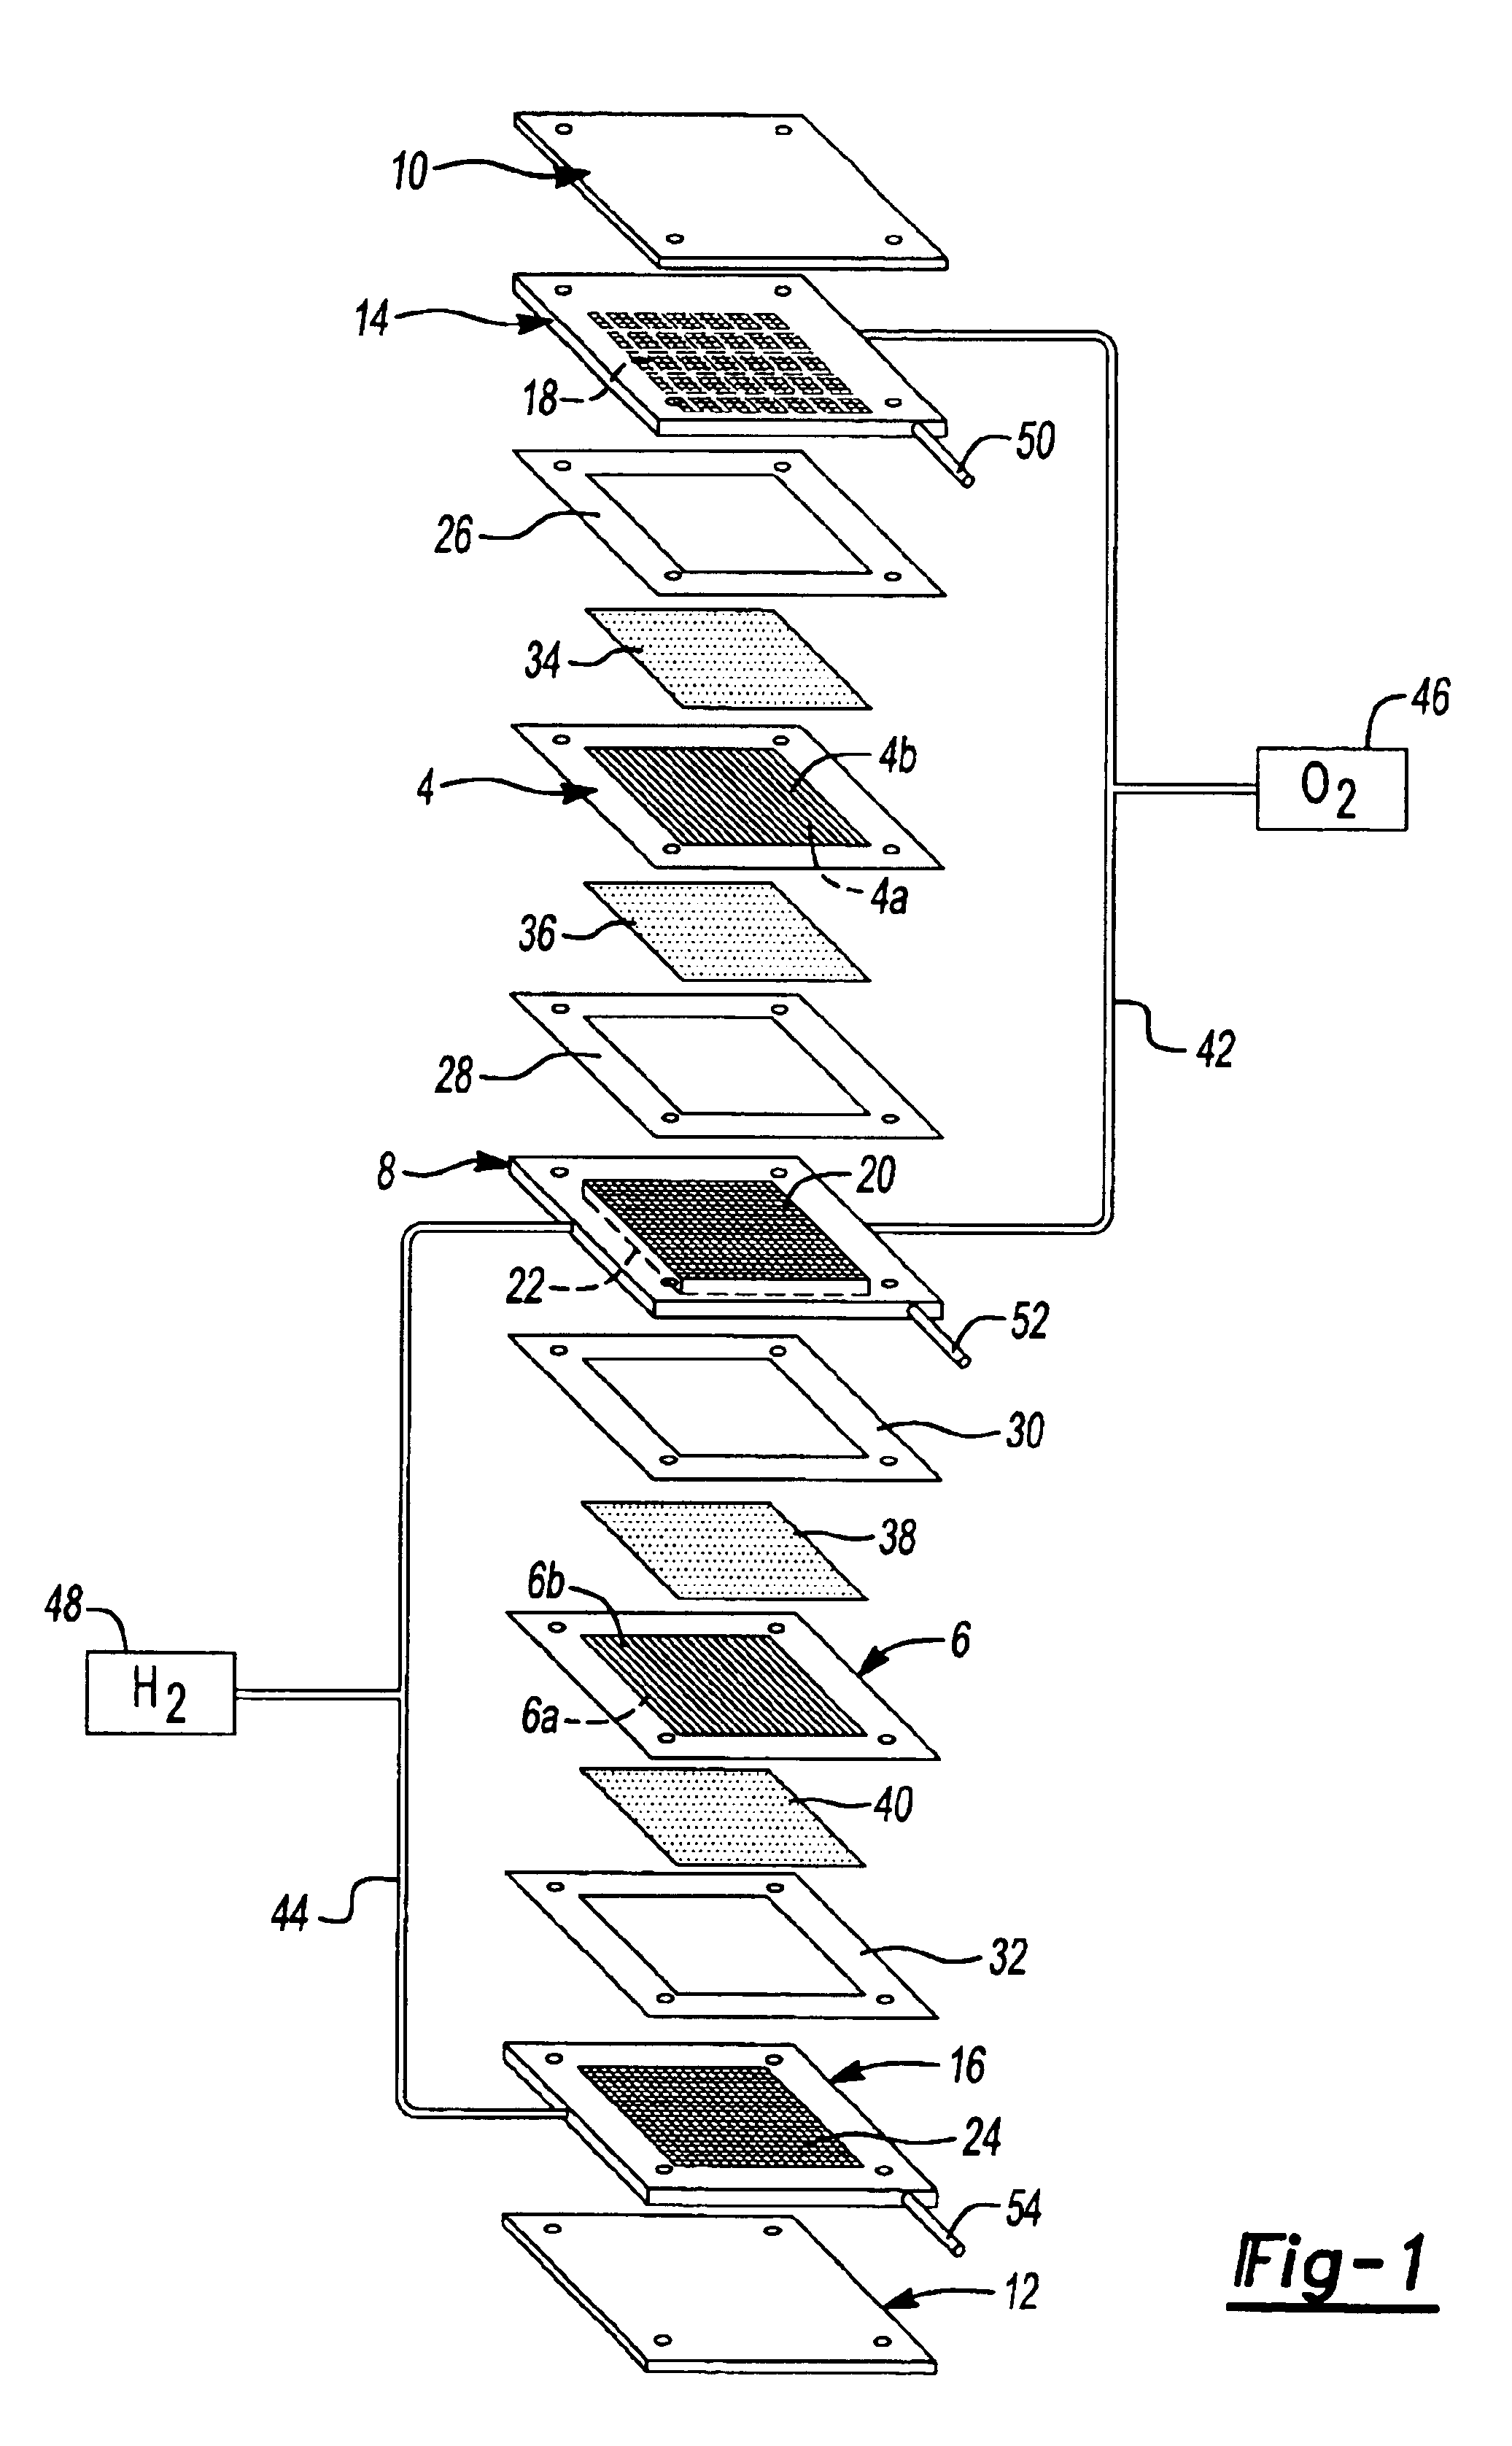 Coolant flow field design for fuel cell stacks